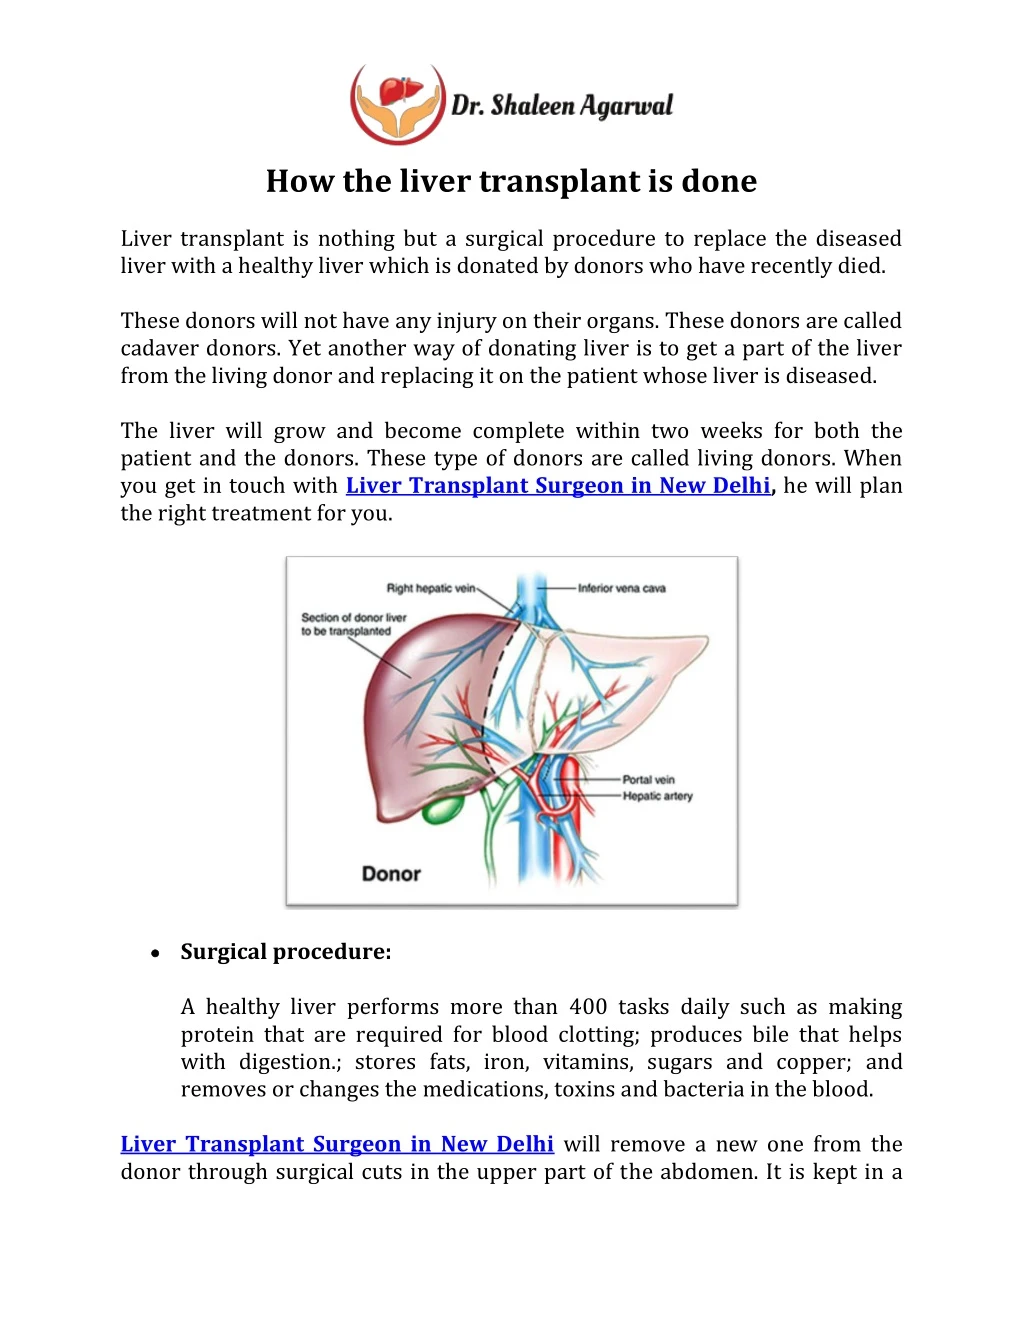 how the liver transplant is done